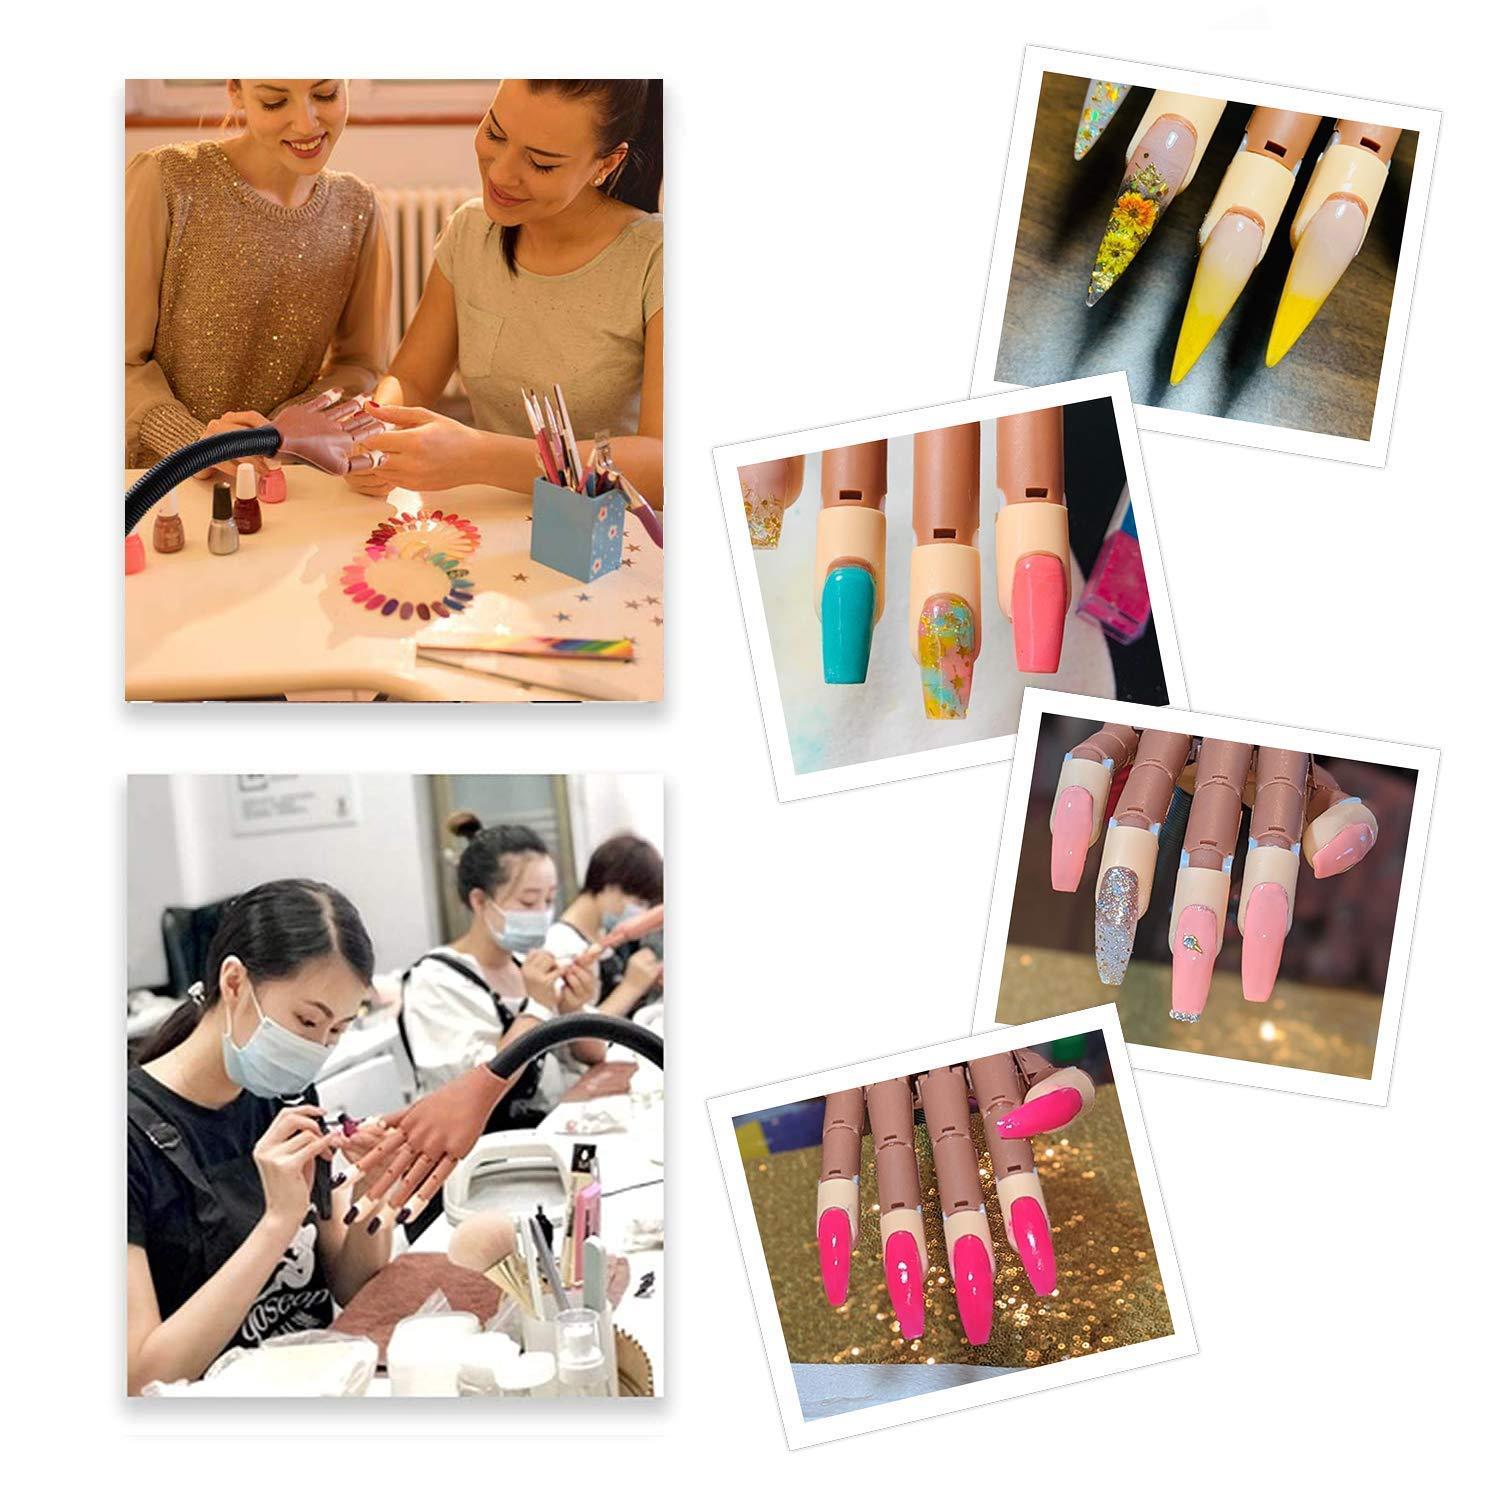 Practice Hand for Acrylic Nail, Fake Hand for Nails Practice, Flexible  Movable Fake Hand Manicure Practice Tool, Nail Art Training Practice